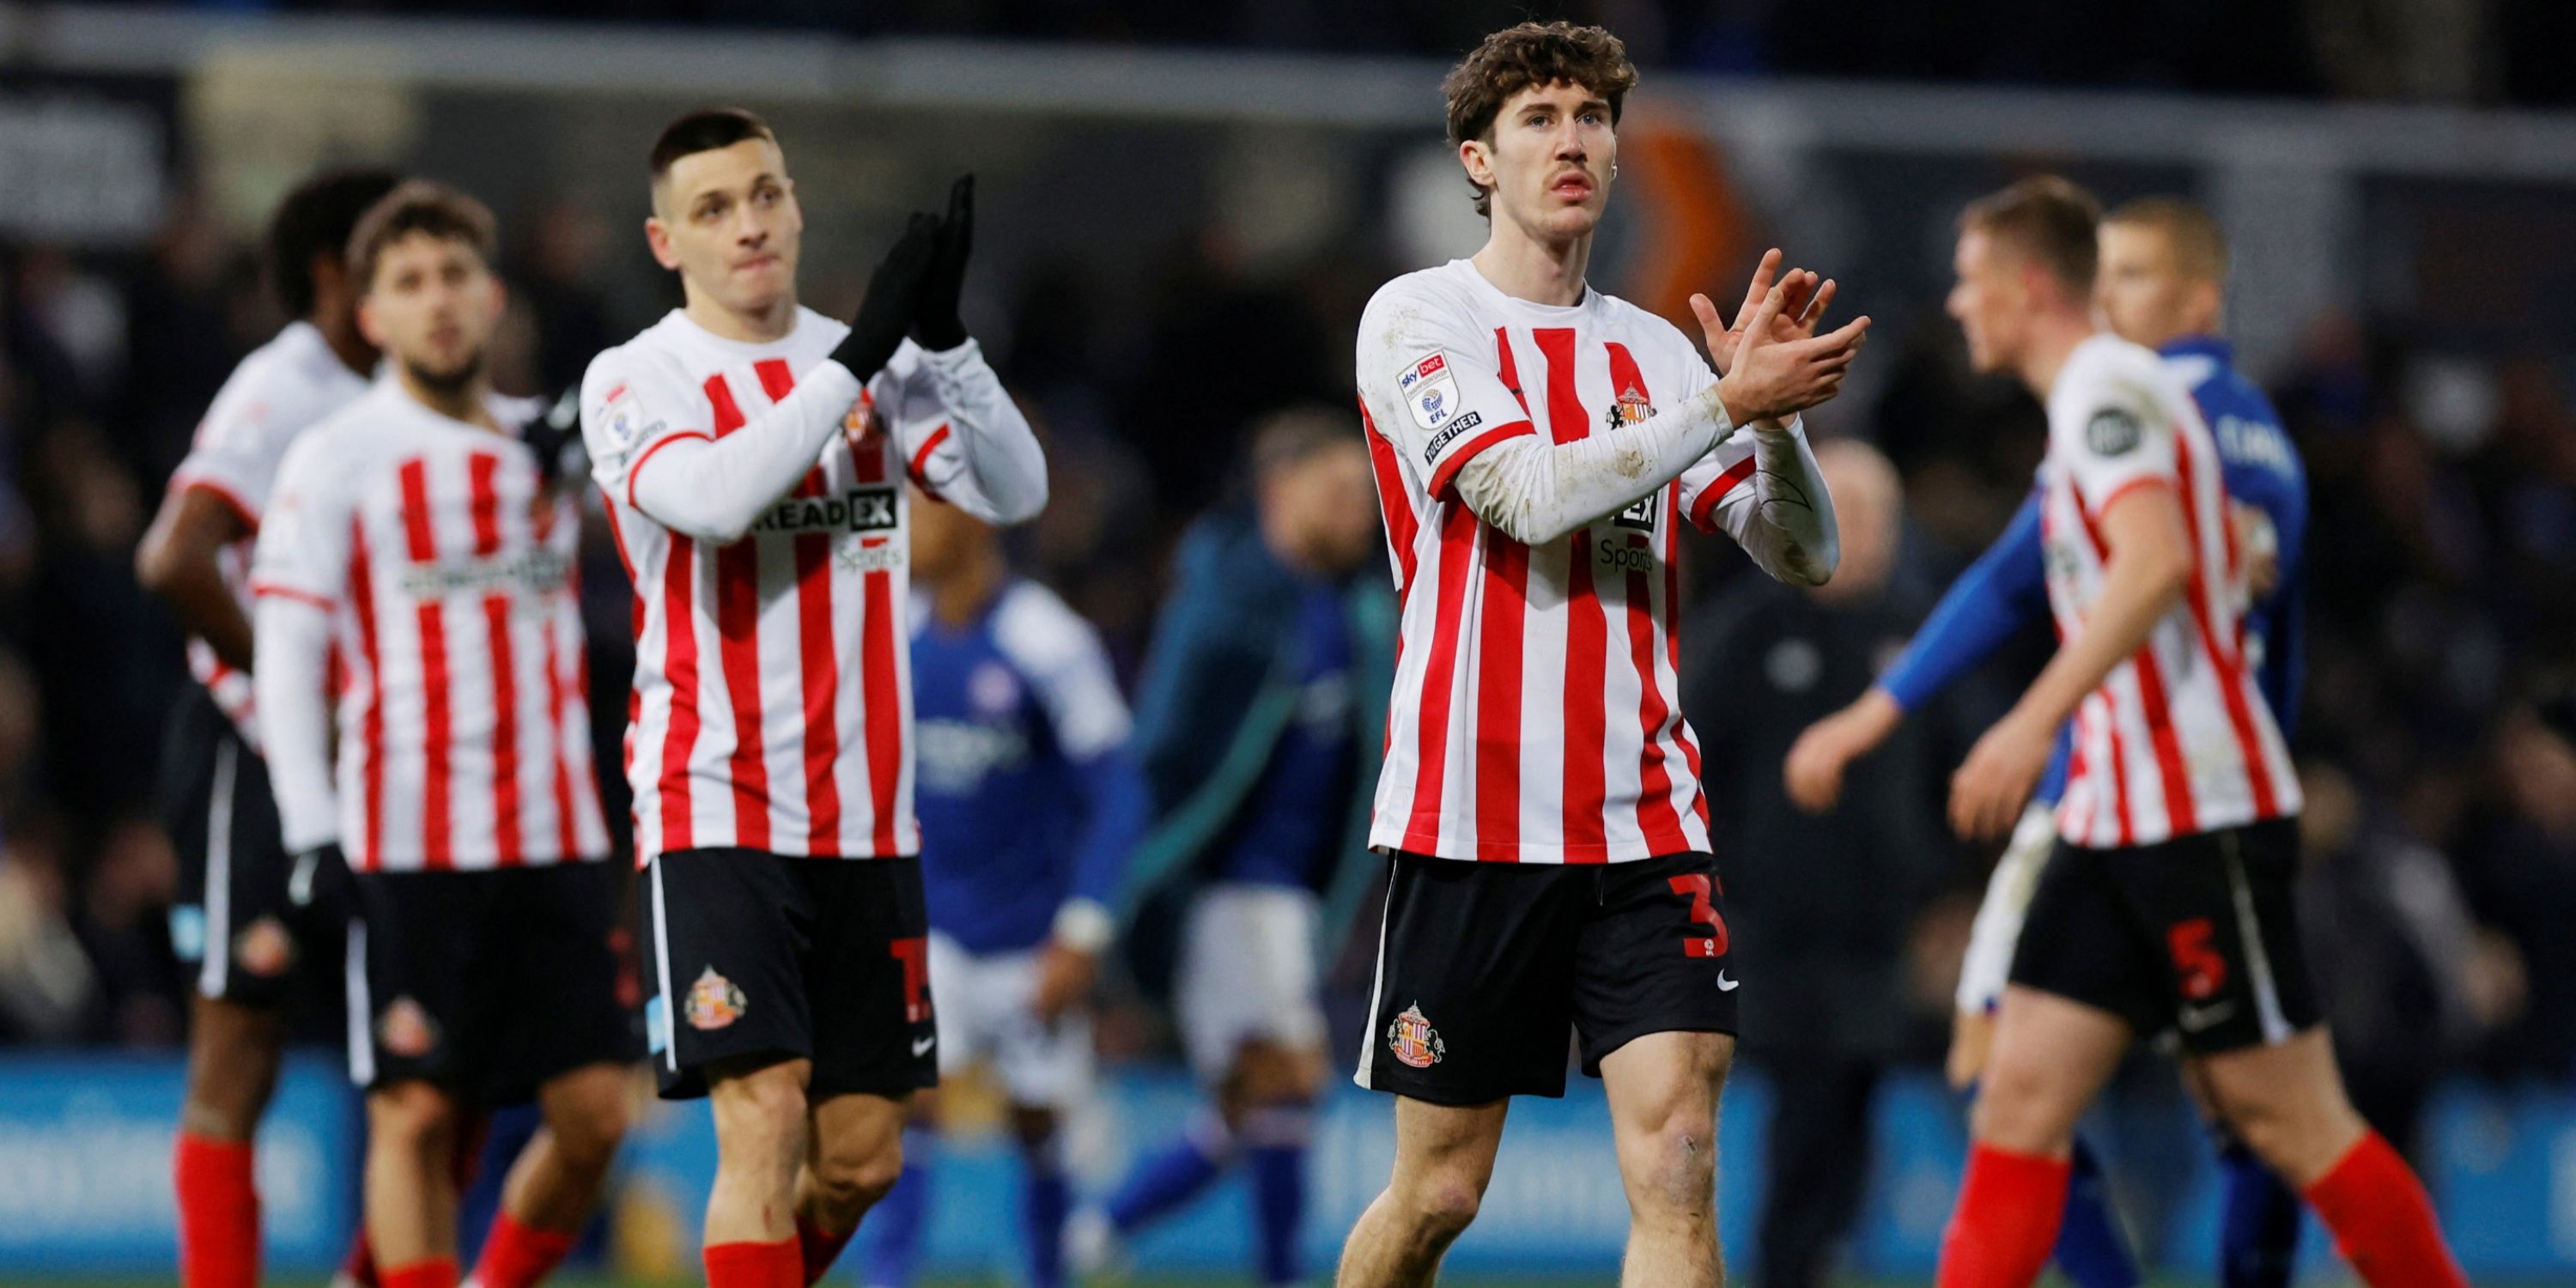 sunderland could've beat norwich if one star was axed from the game quicker